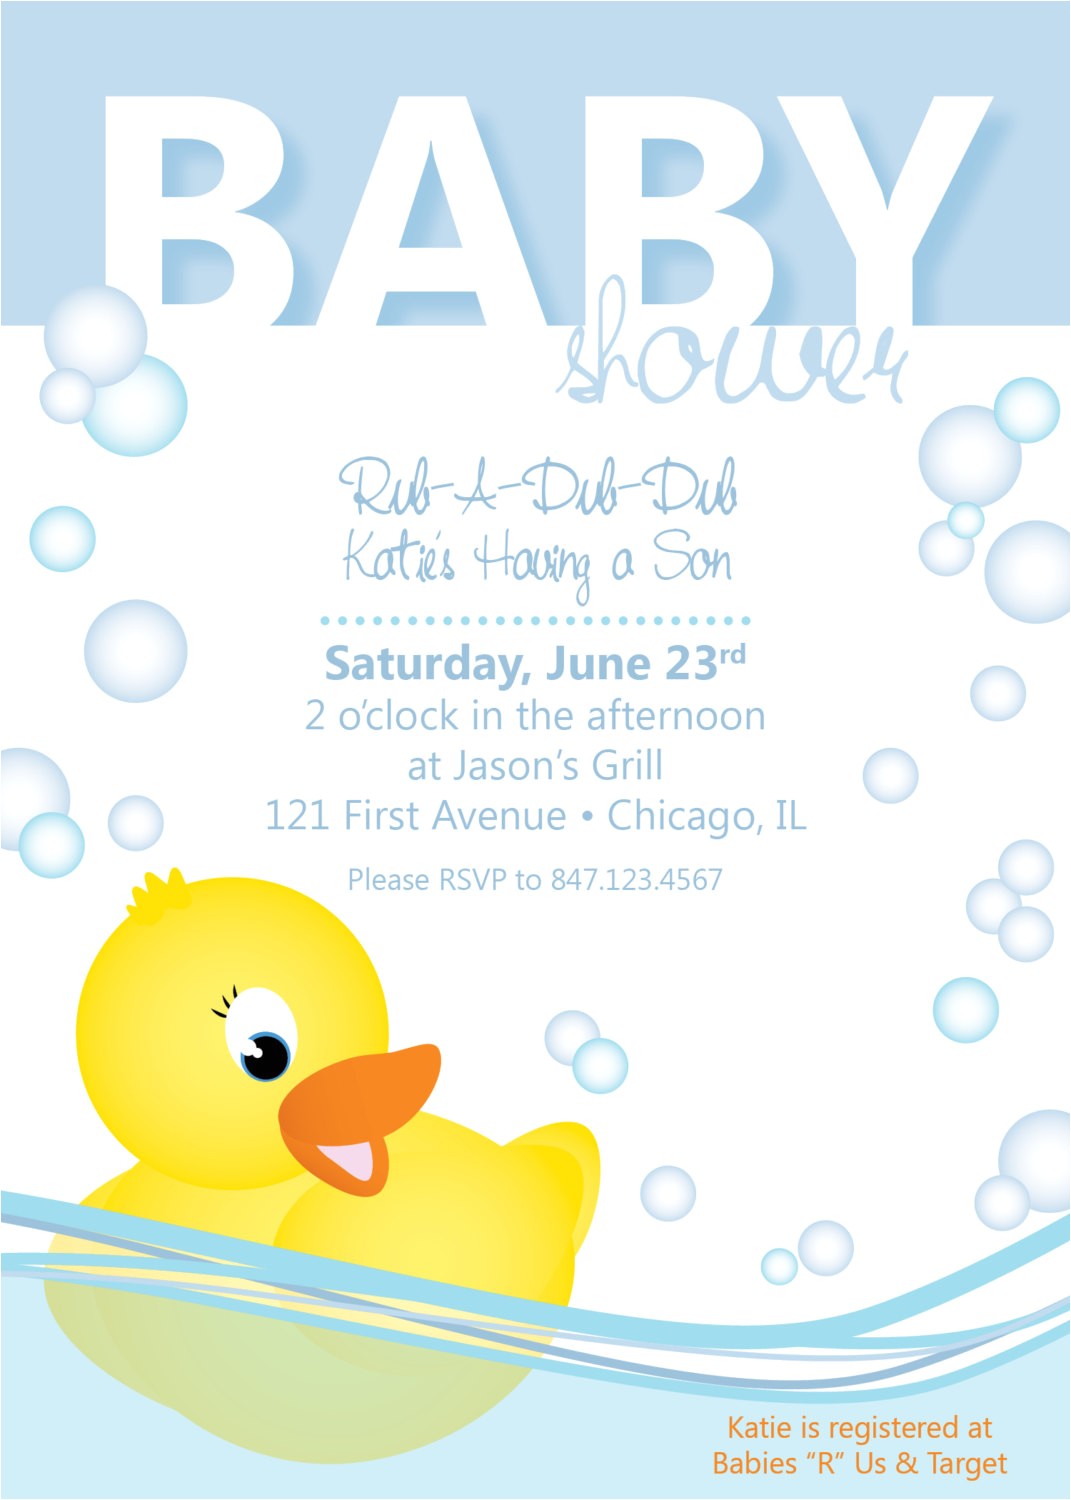 Rubber Ducky Baby Shower Invitations Template Free Baby Shower Invitations Rubber Ducky